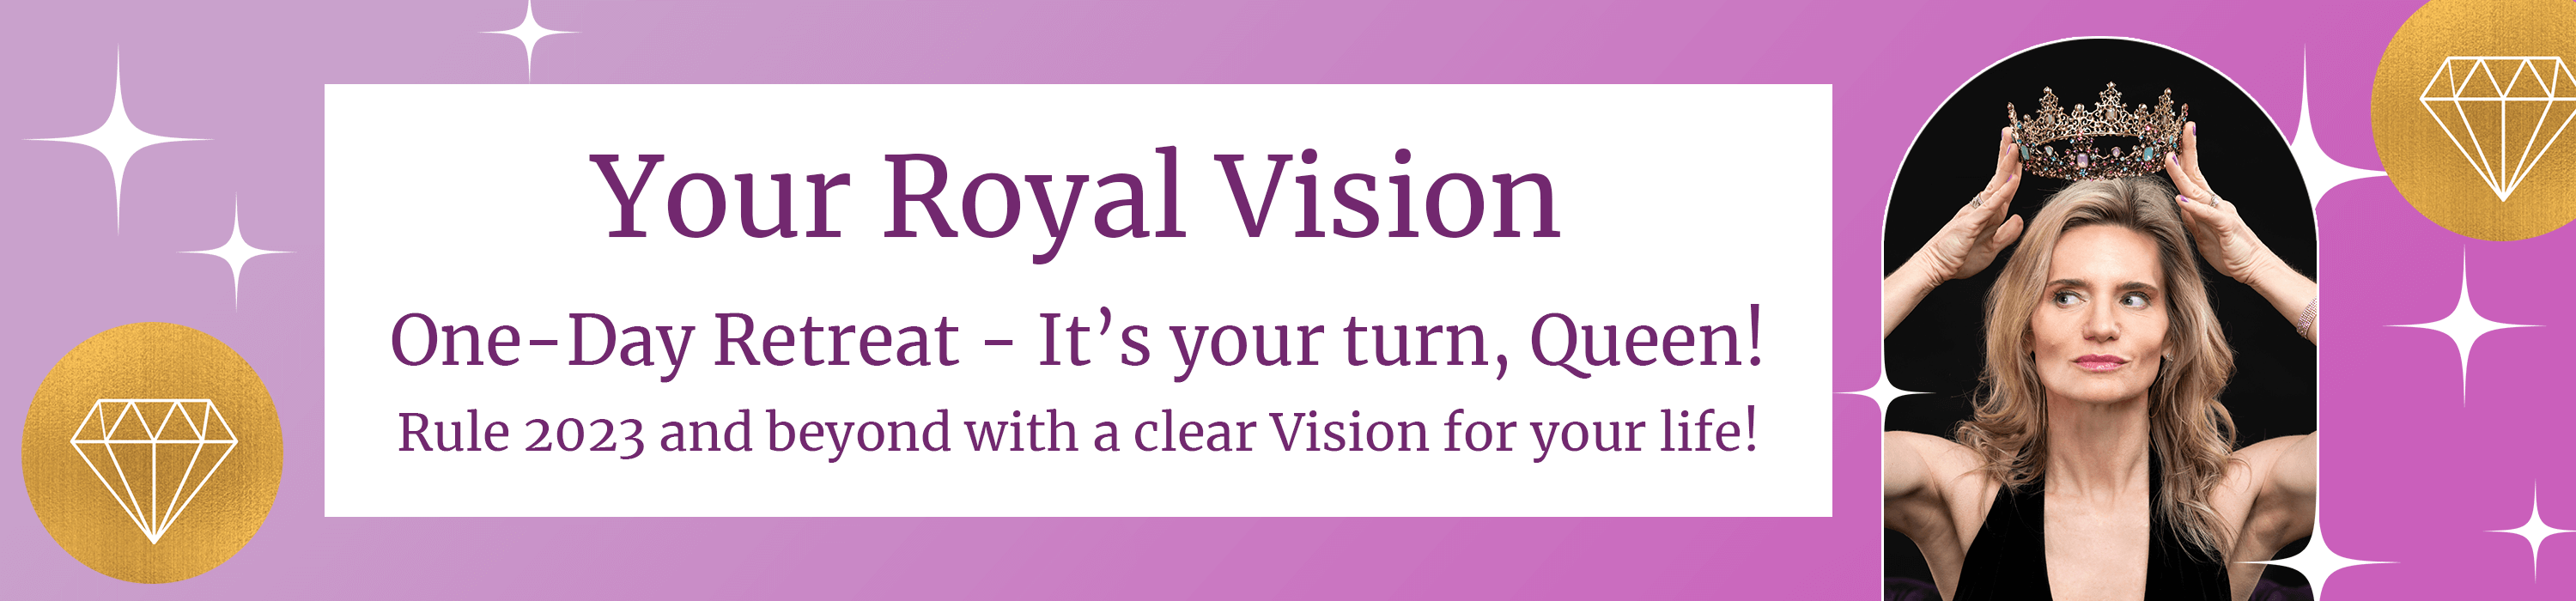 Your Royal Vision